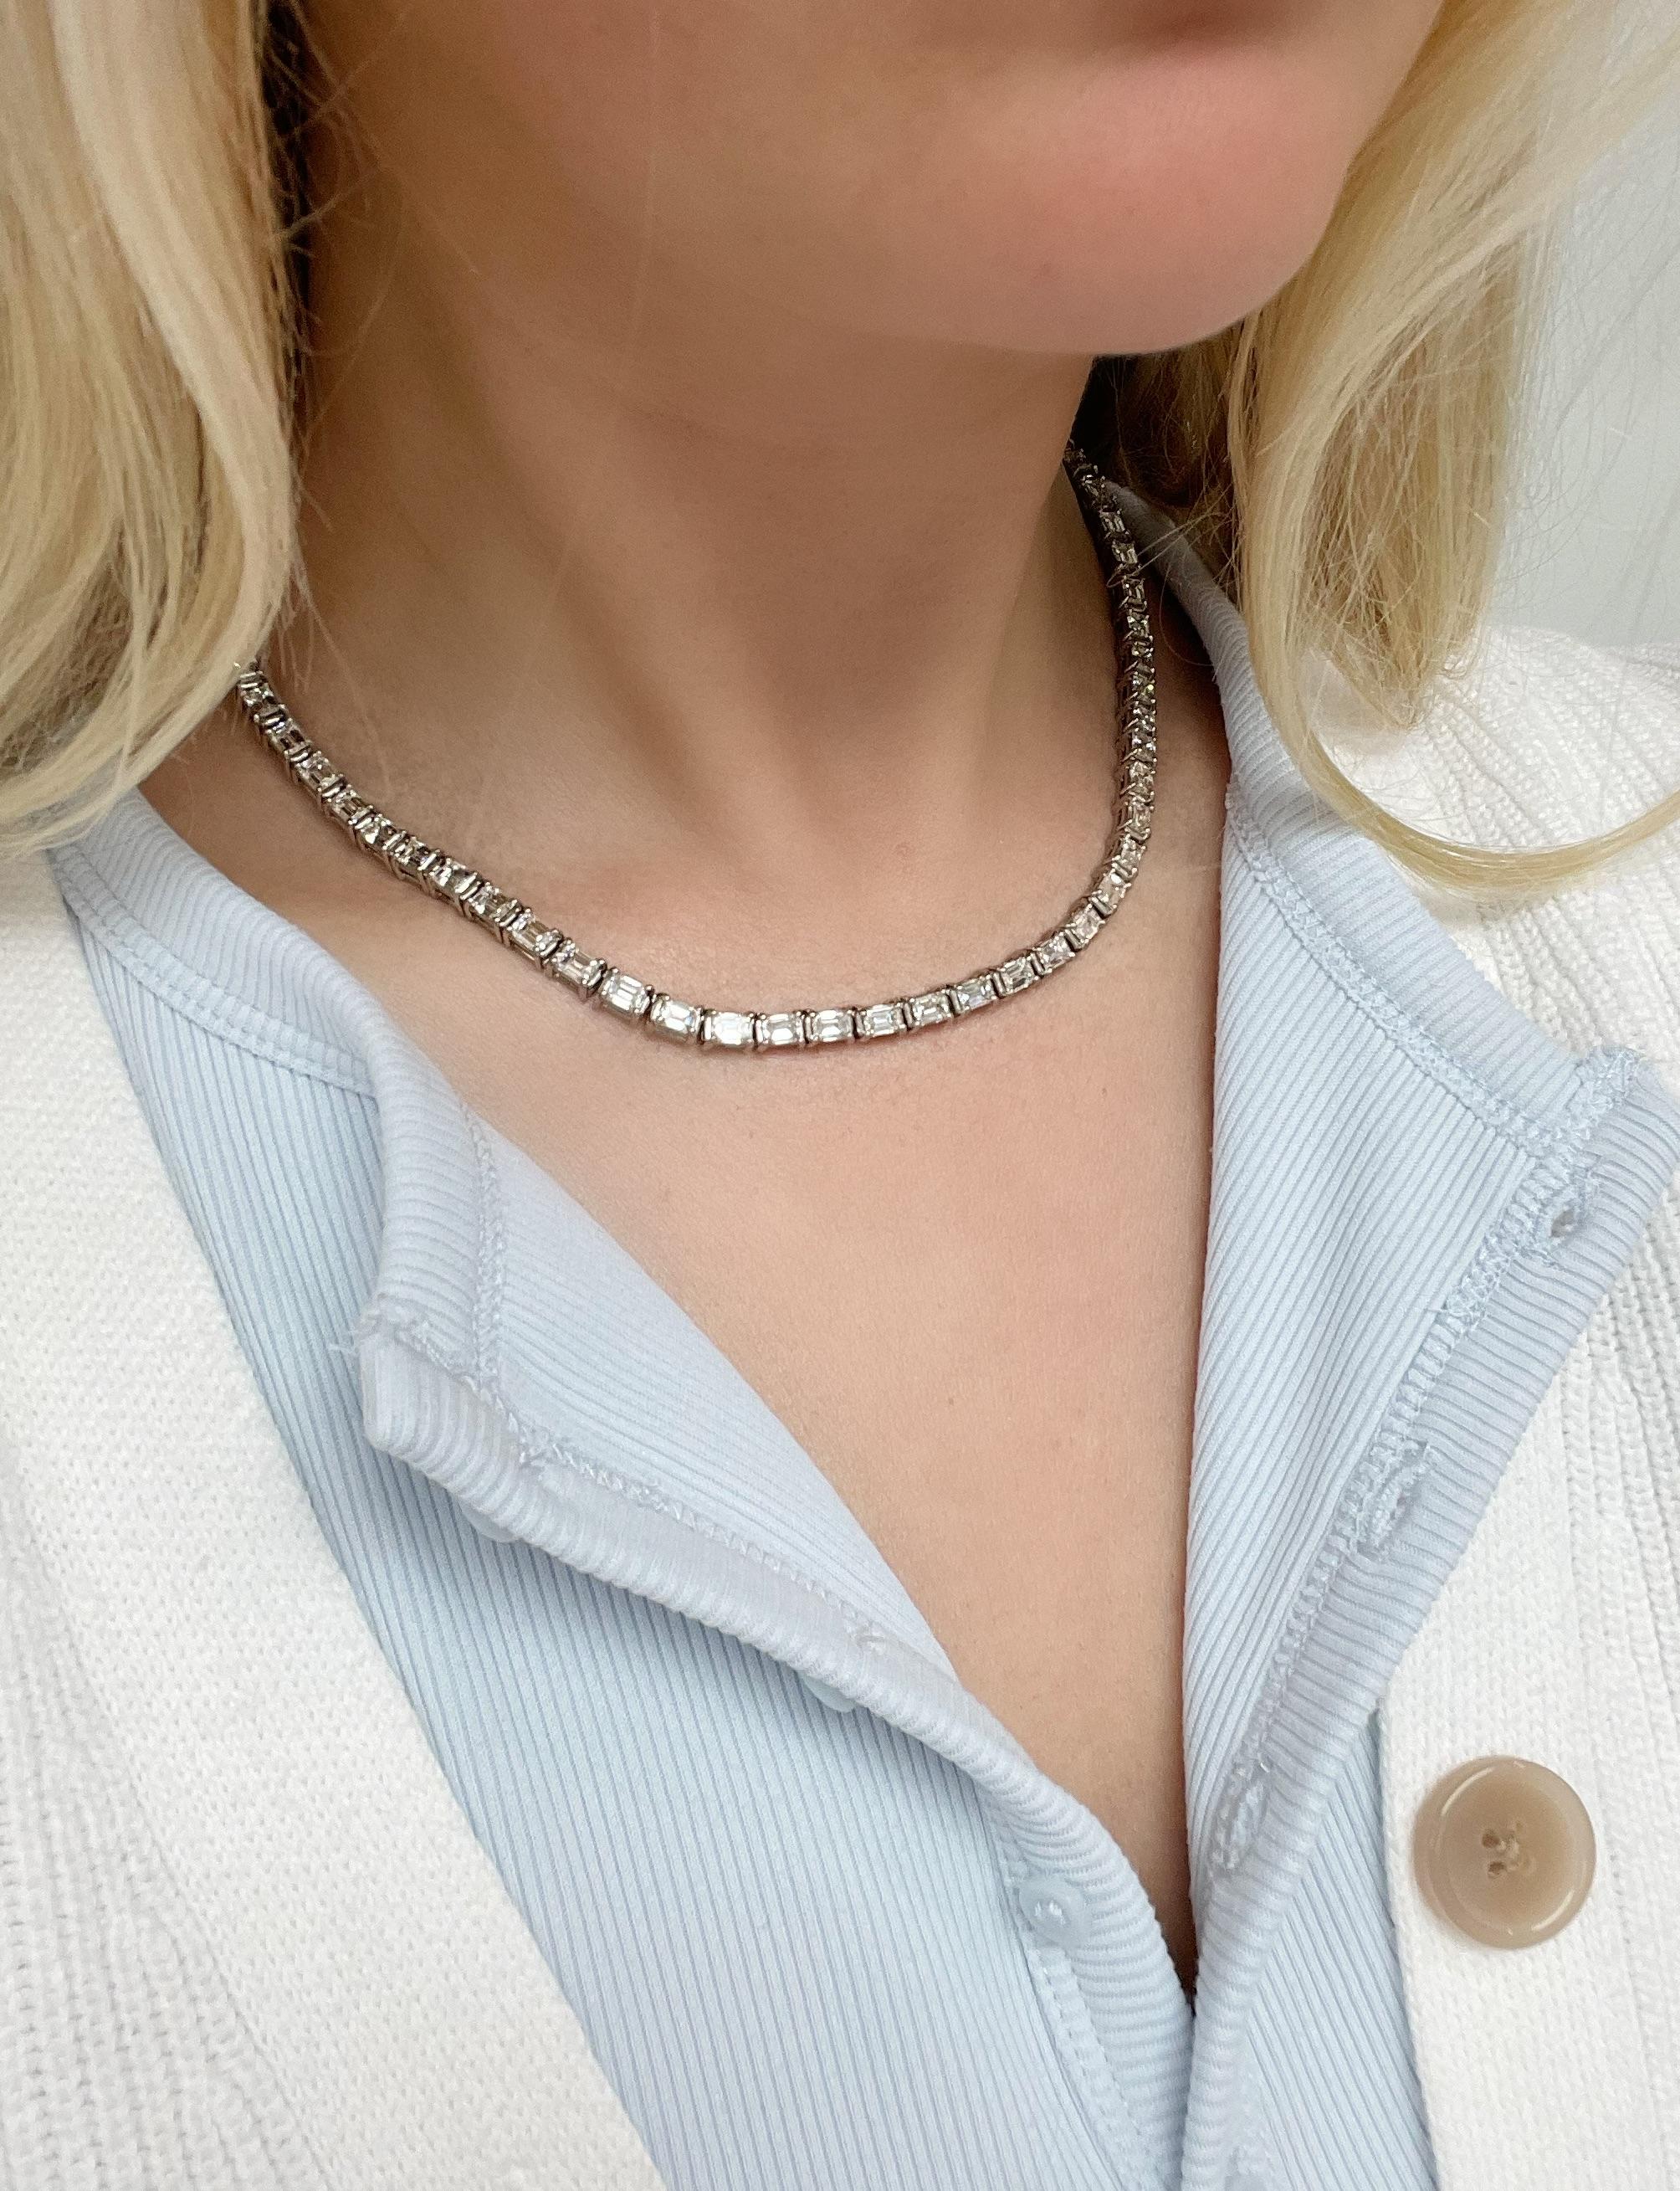 This gorgeous diamond necklace boasts 66 emerald cut diamonds weighing 20.64 carats total. Mounted east west in platinum, this necklace gives a modern twist to the classic riviere necklace that is sure to wow!

Total length: 16 inches
Material: